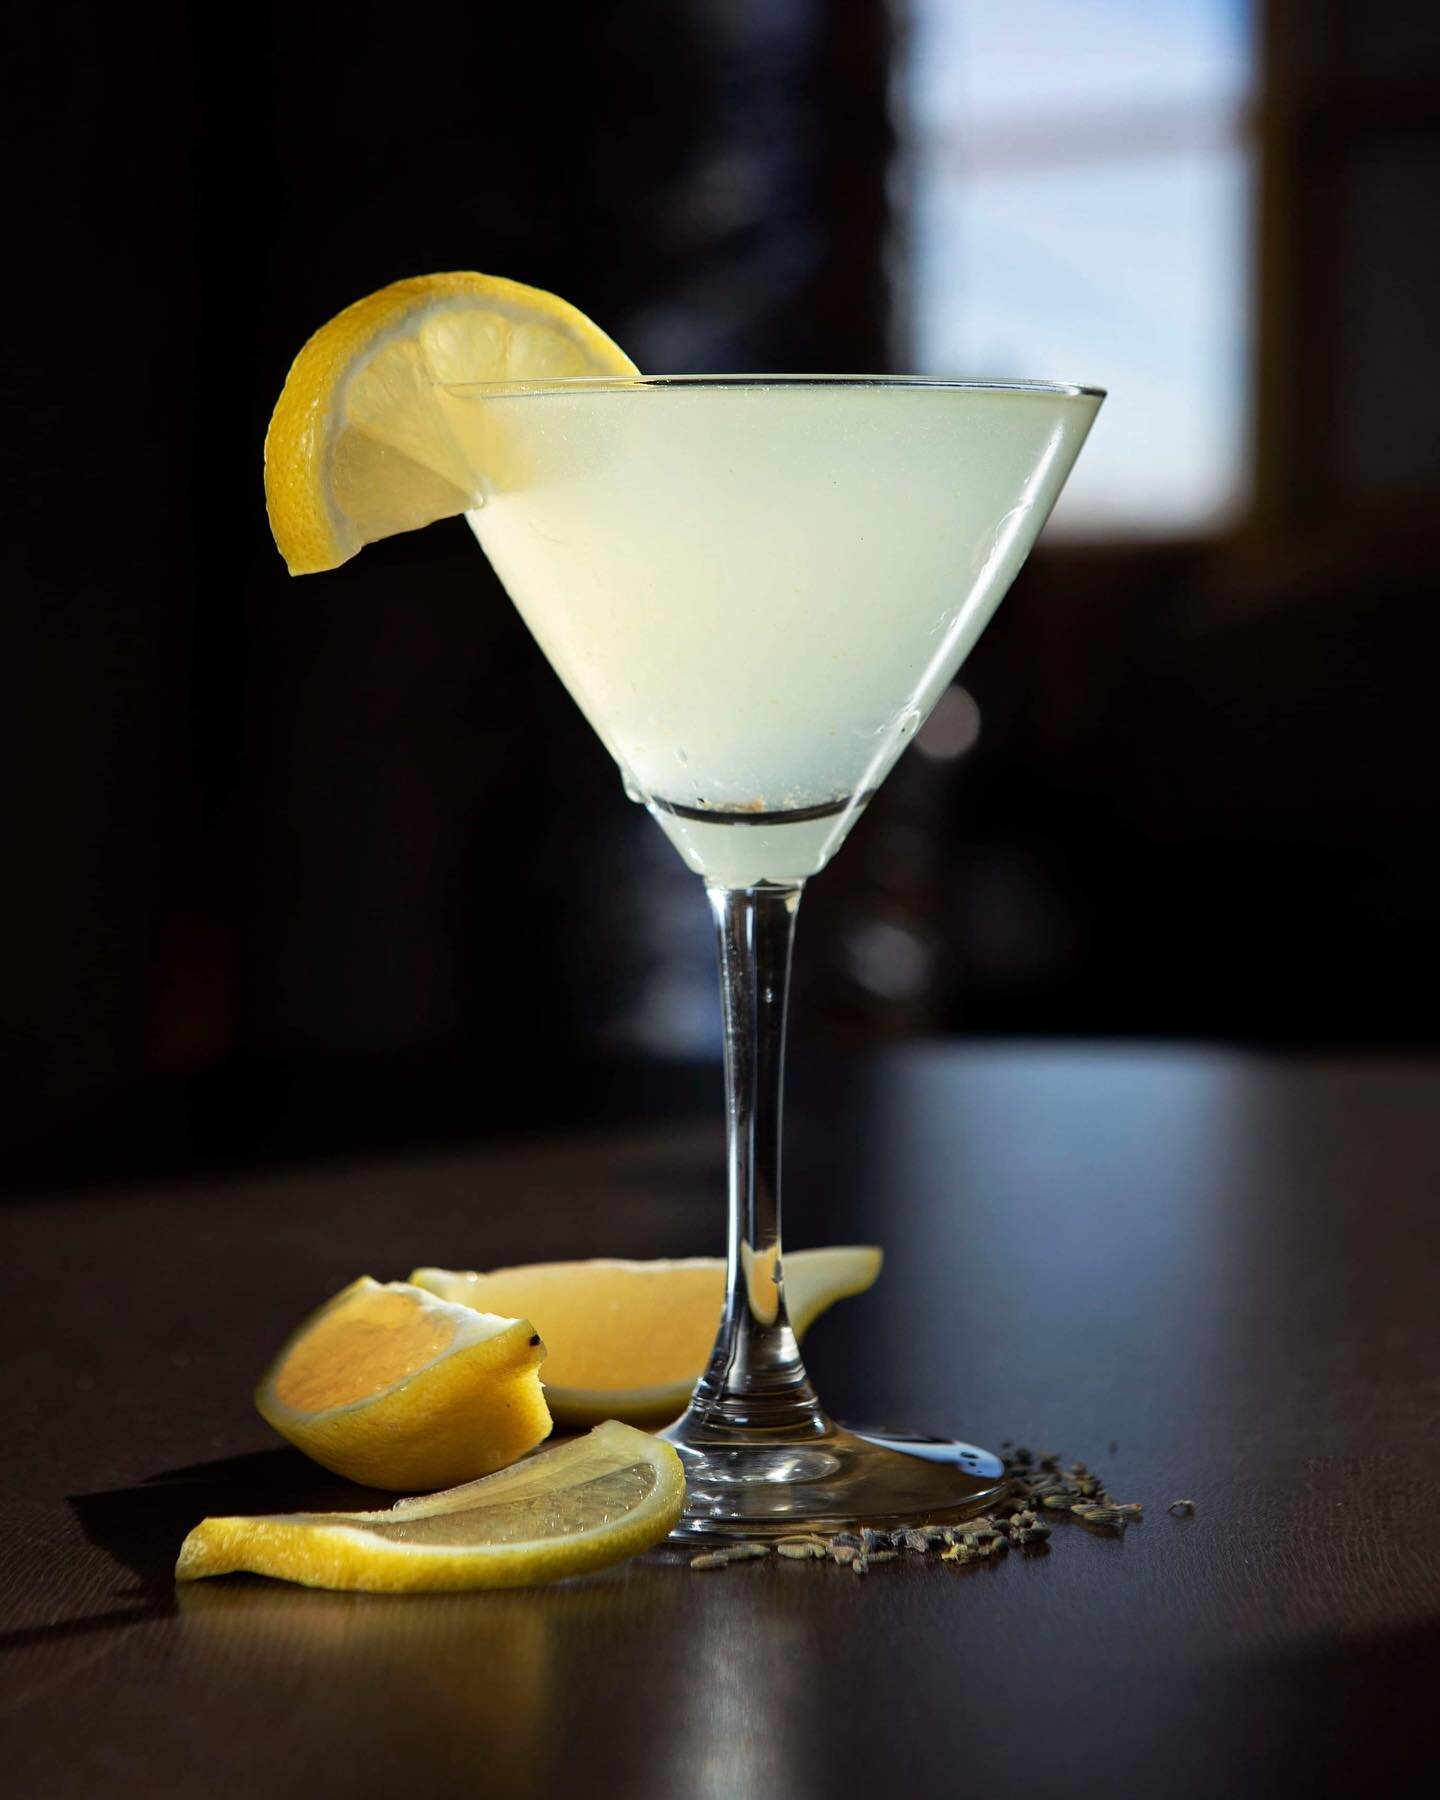 A #Lavender #Cosmopolitan at The Pourhouse #American #Grille in this months @bclmag #cocktails #its5oclocksomewhere #lemon #vanillavodka #liquor